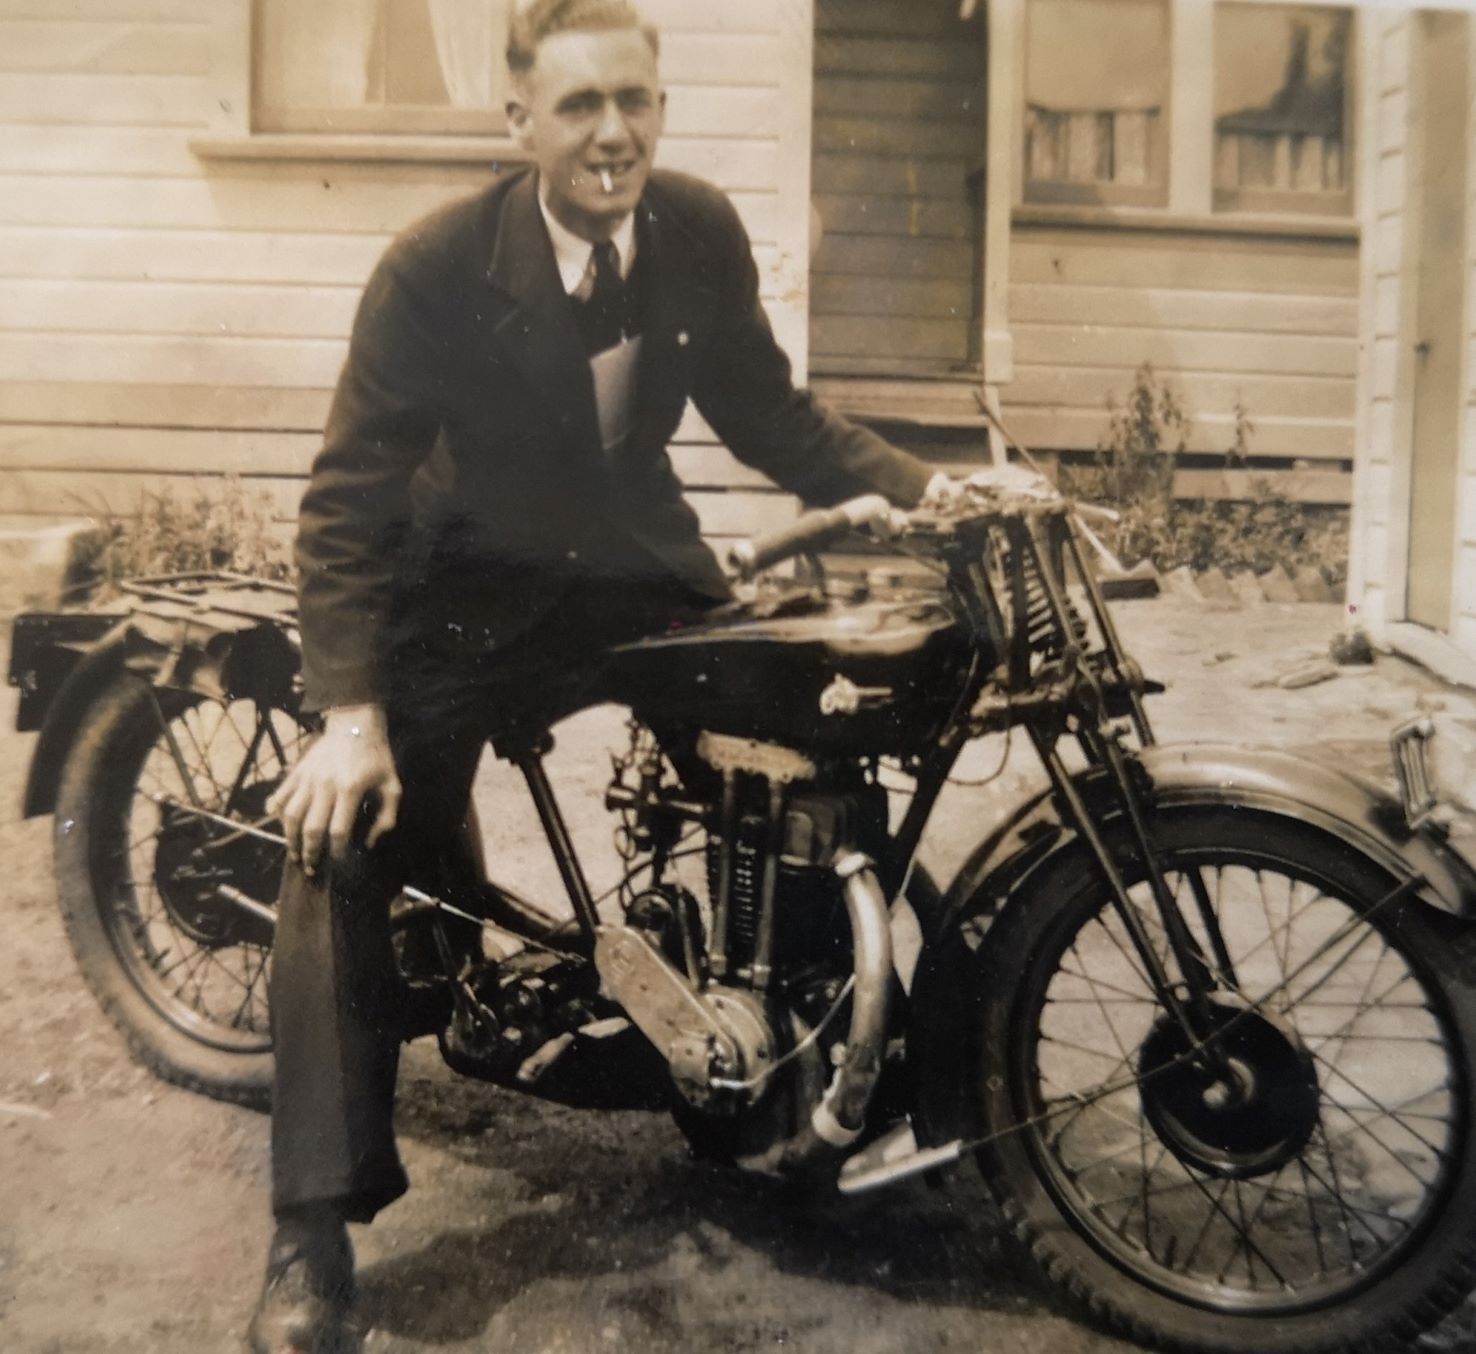 Ross Stone's Grandfather, Wynn Whitehead with his motorbike